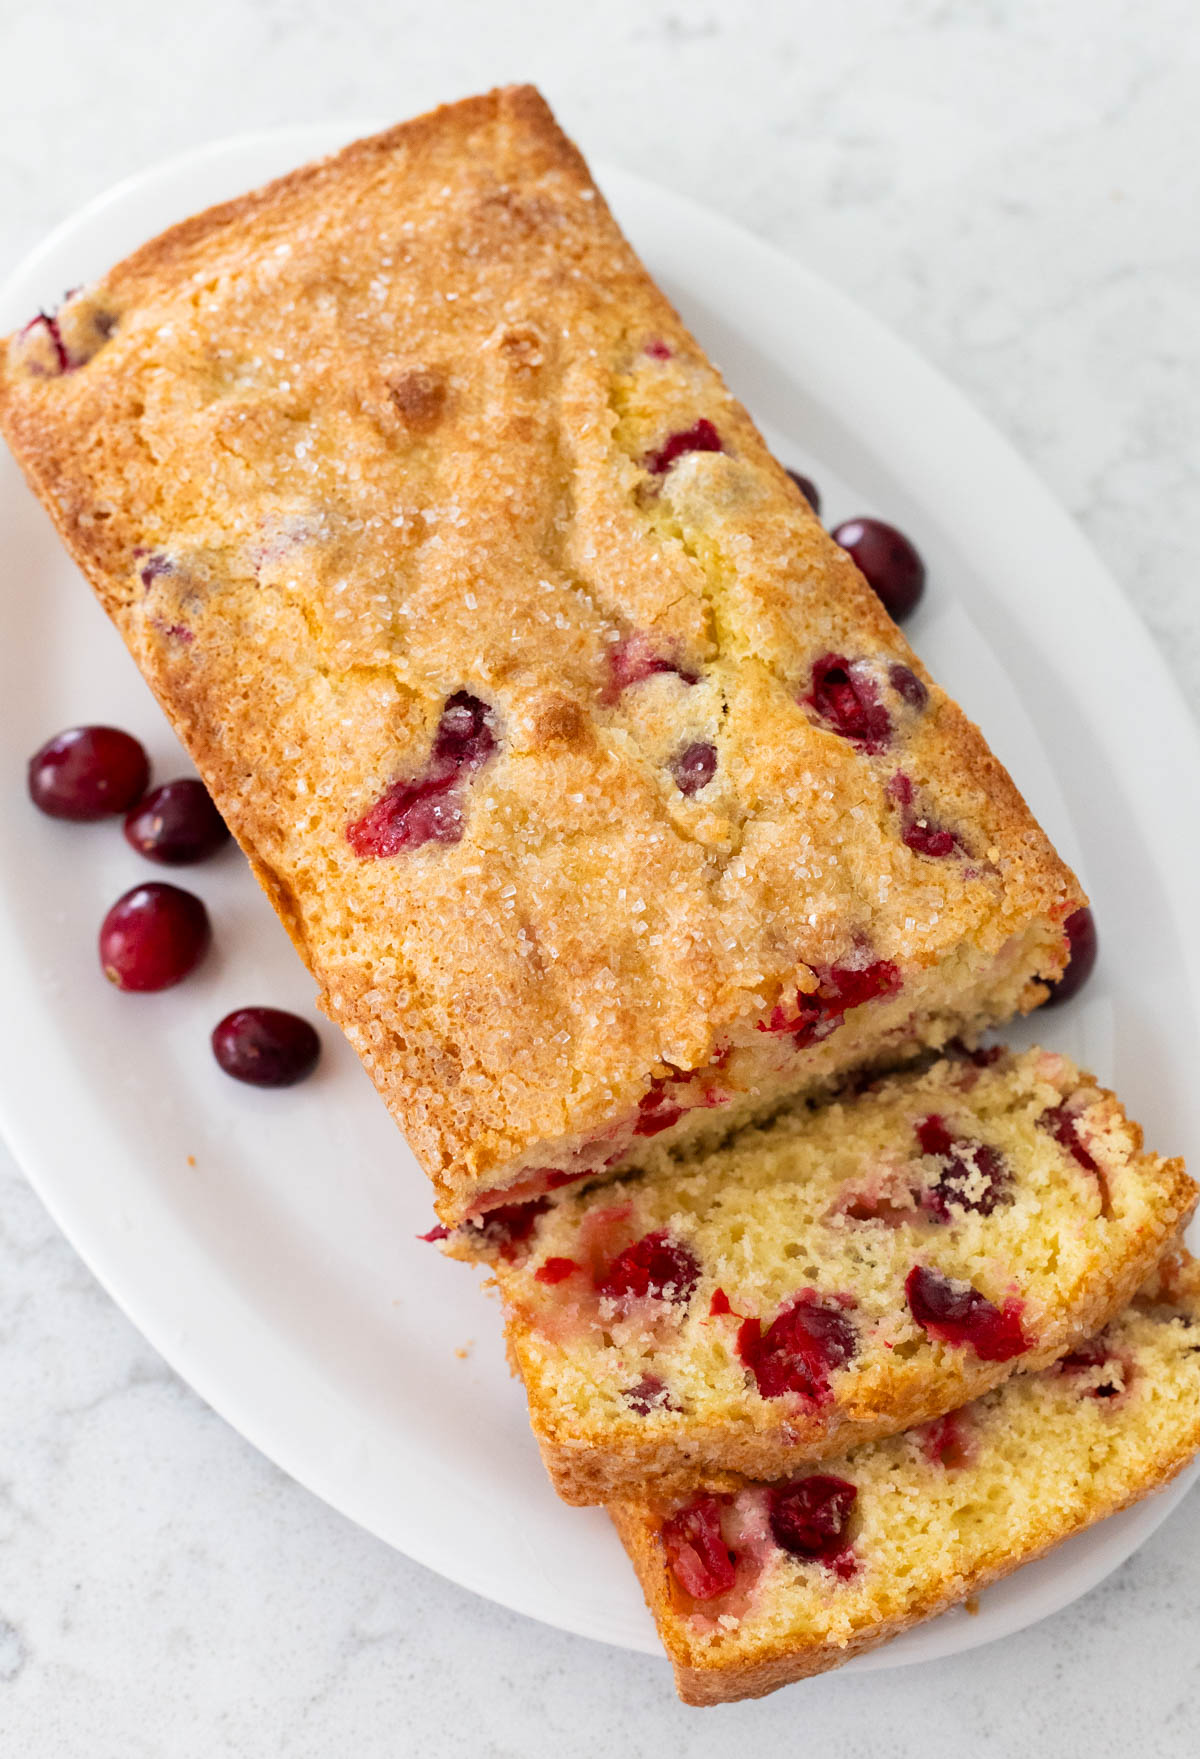 The loaf of homemade cranberry bread is on a white platter, two slices have been sliced so you can see the texture of the quick bread and the large, whole cranberries.